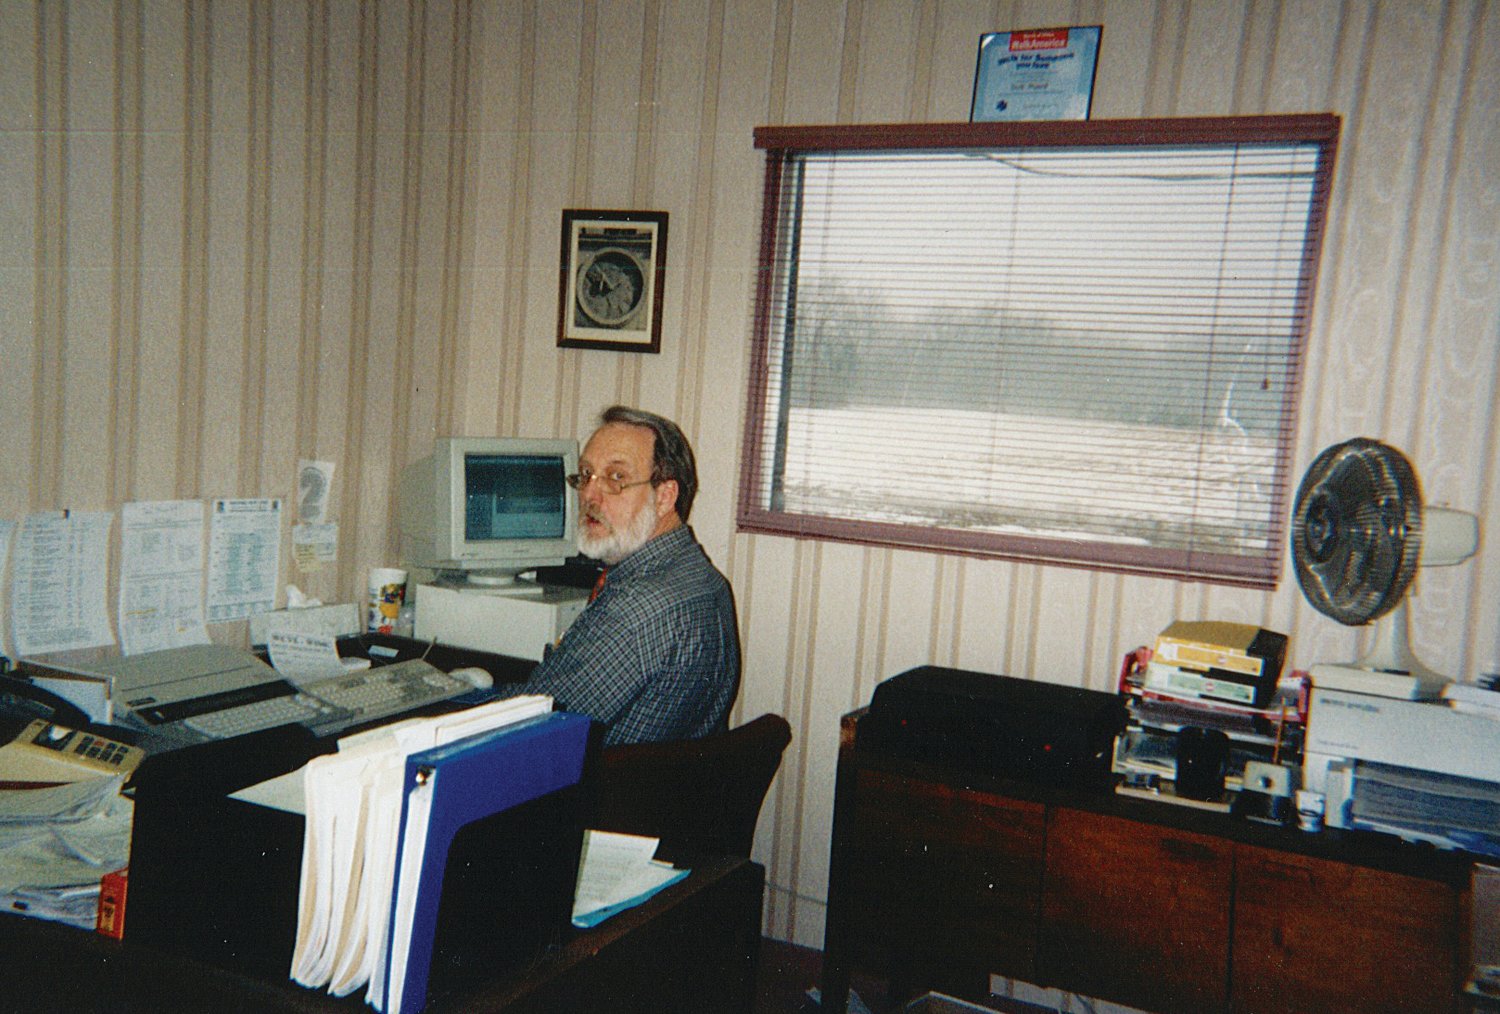 Dick Munro works at his desk in the WIMC/WCVL offices in 1990. Munro, the stations